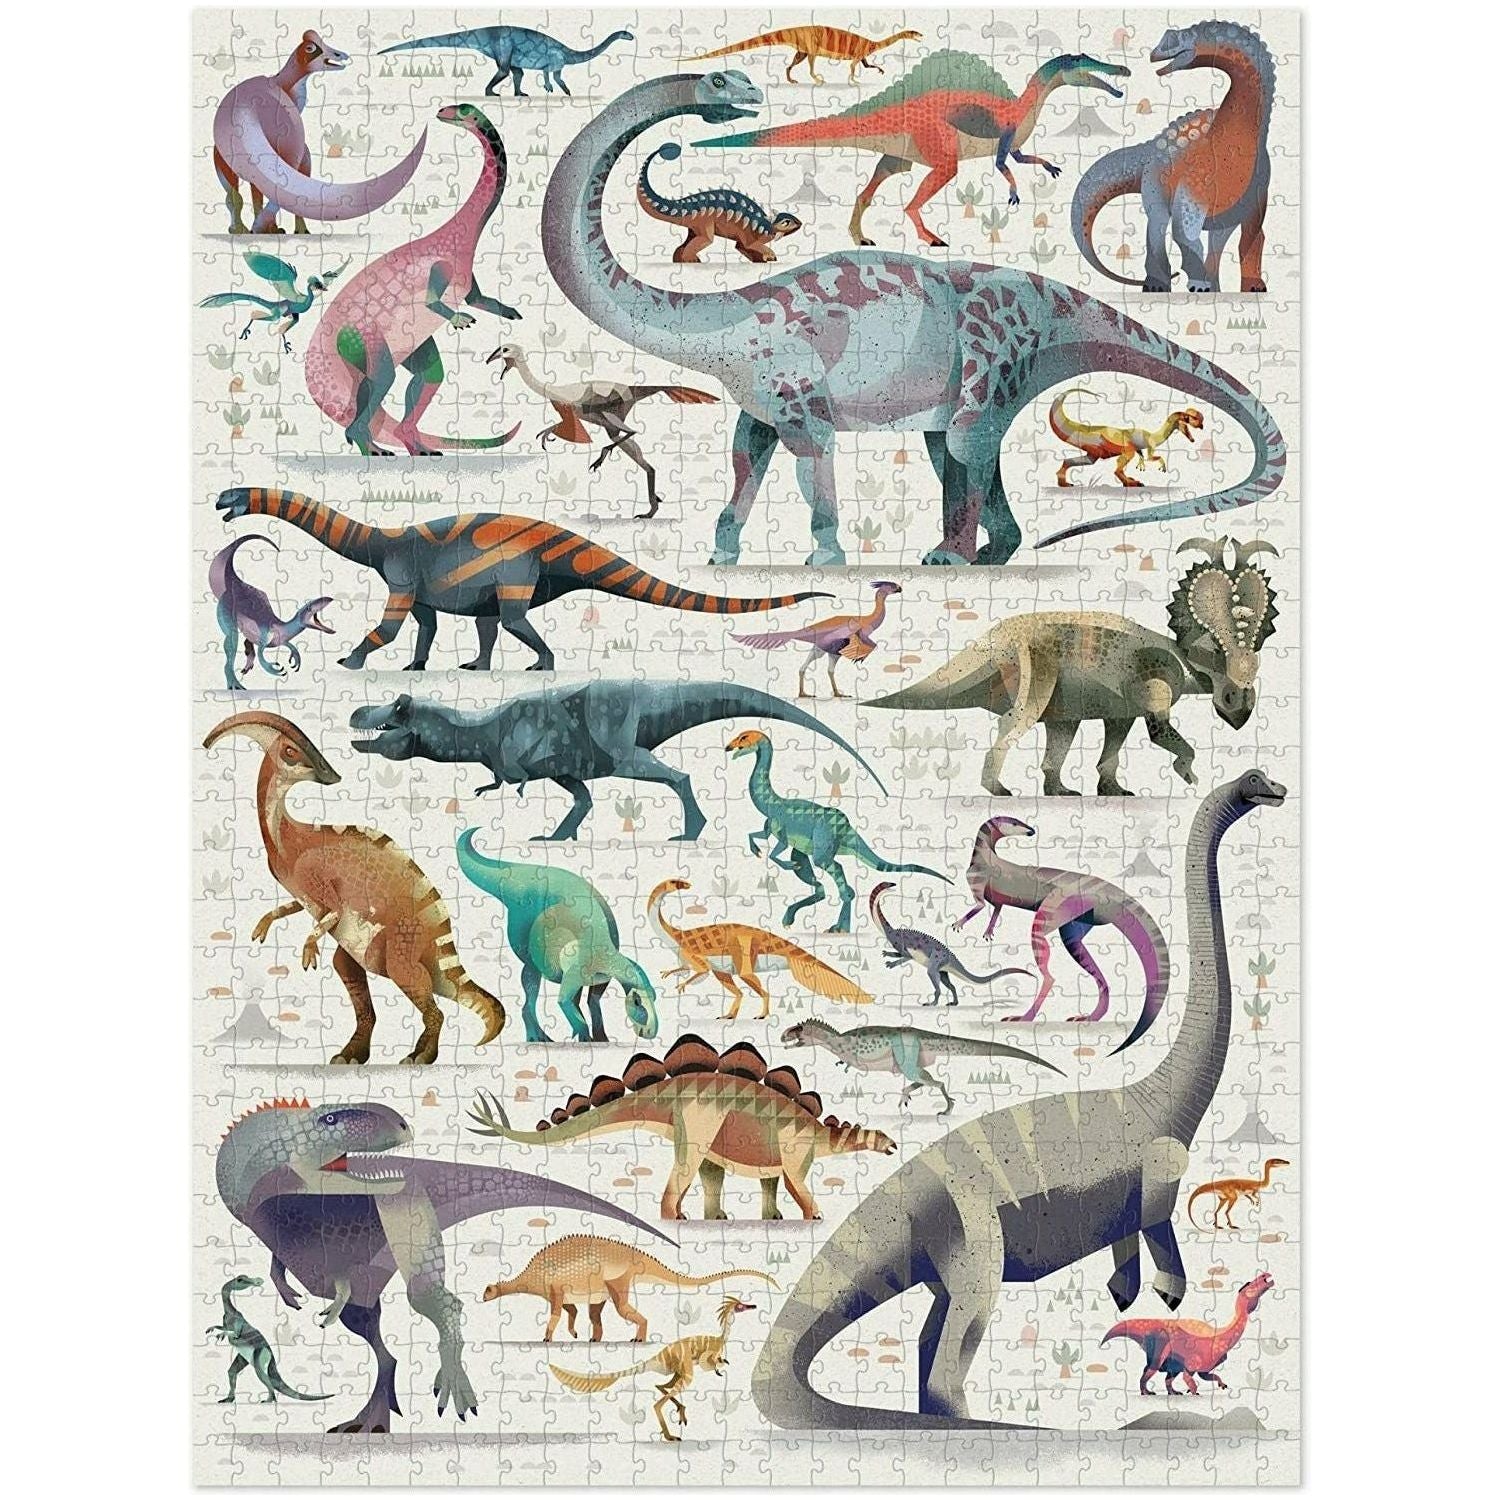 World of Dinosaurs 750 Piece Puzzle